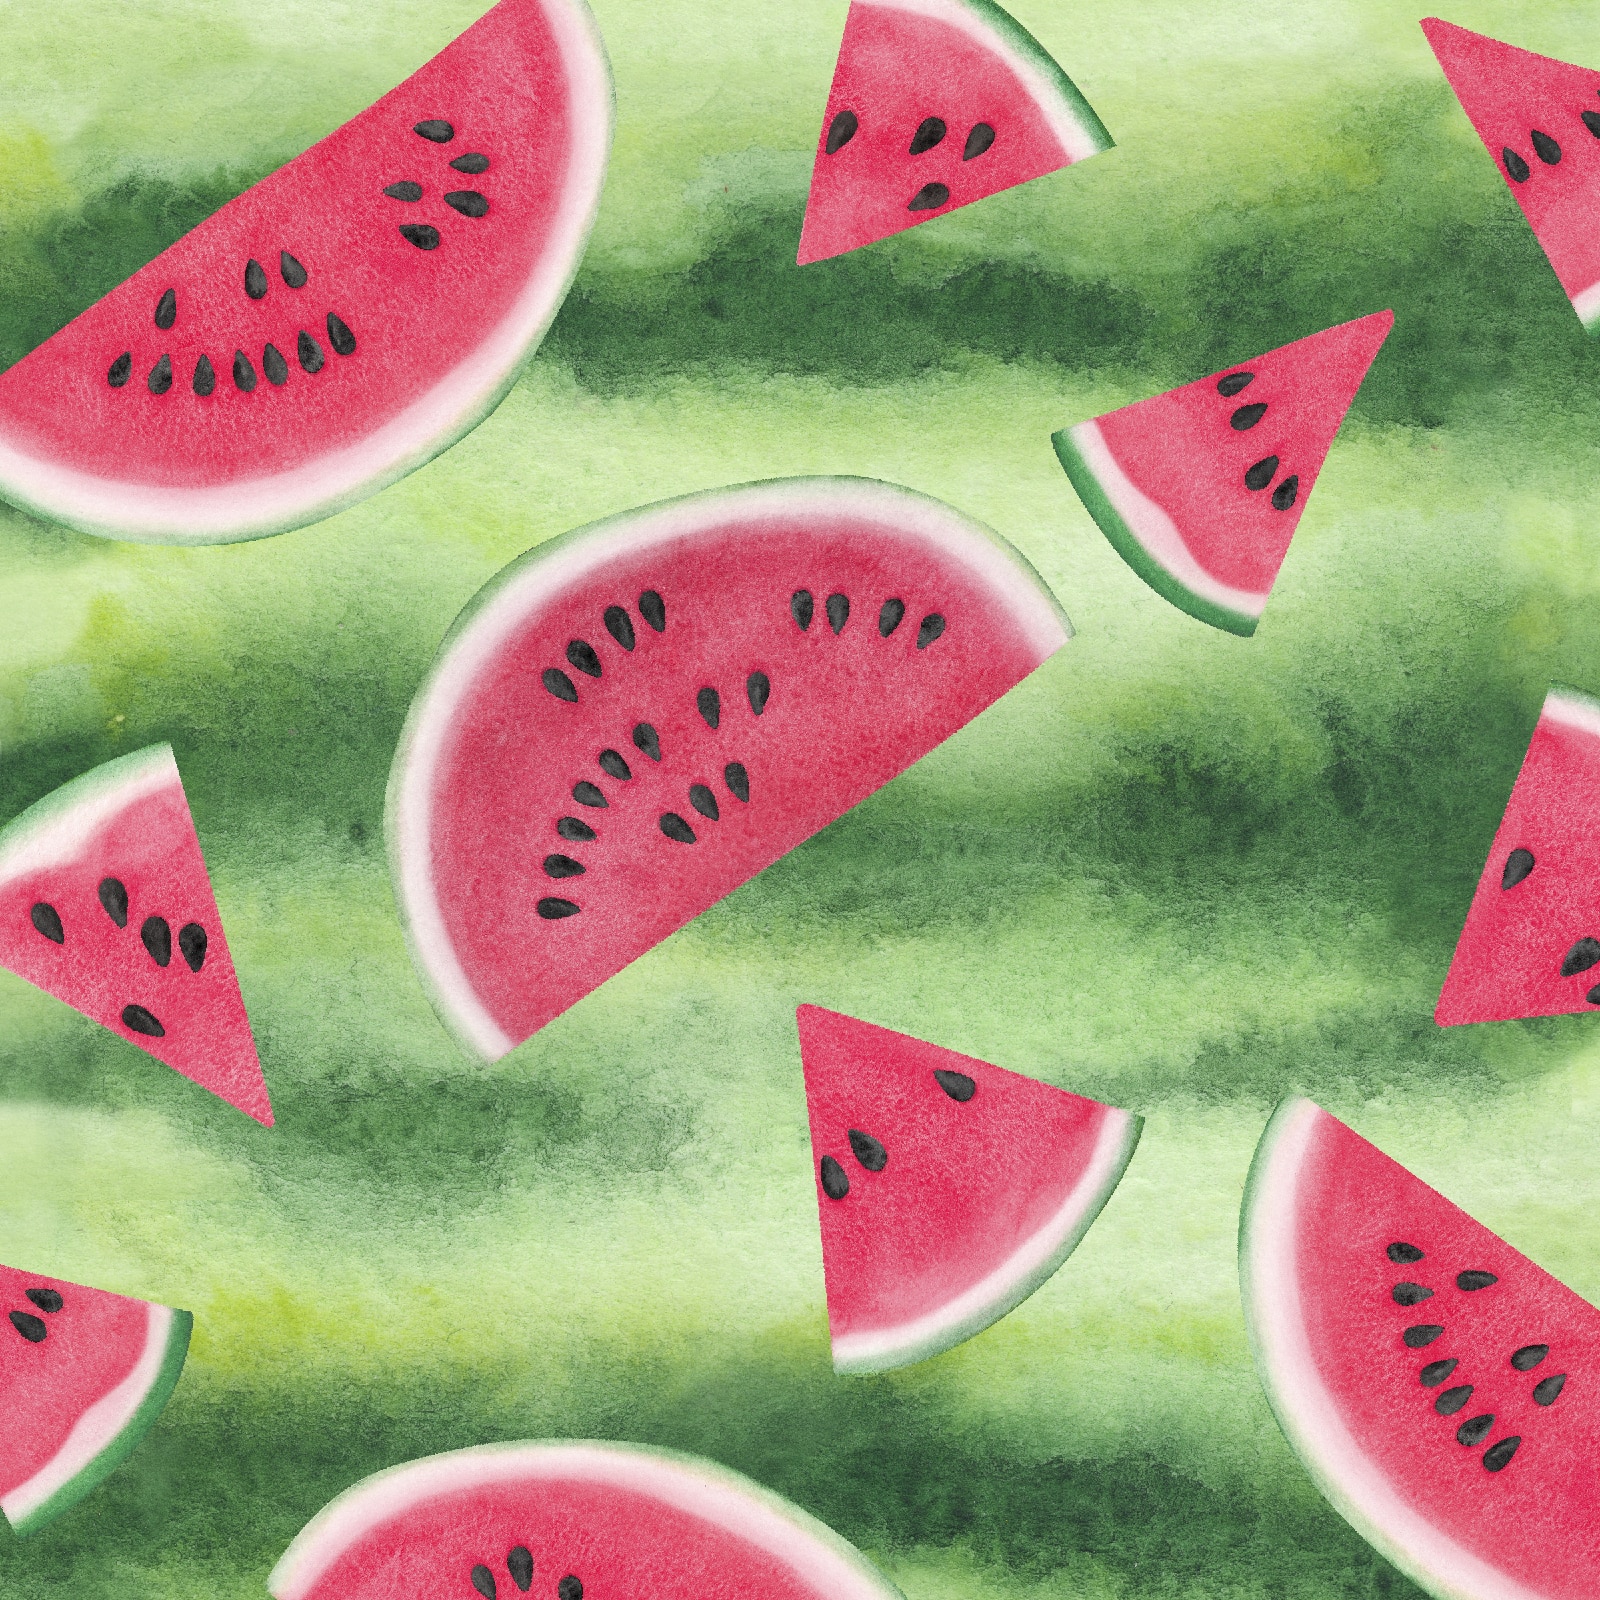 Two Fun  Handcrafted Watermelon Design Hot Pads  About 9 1/2" High w/o Top Loop 